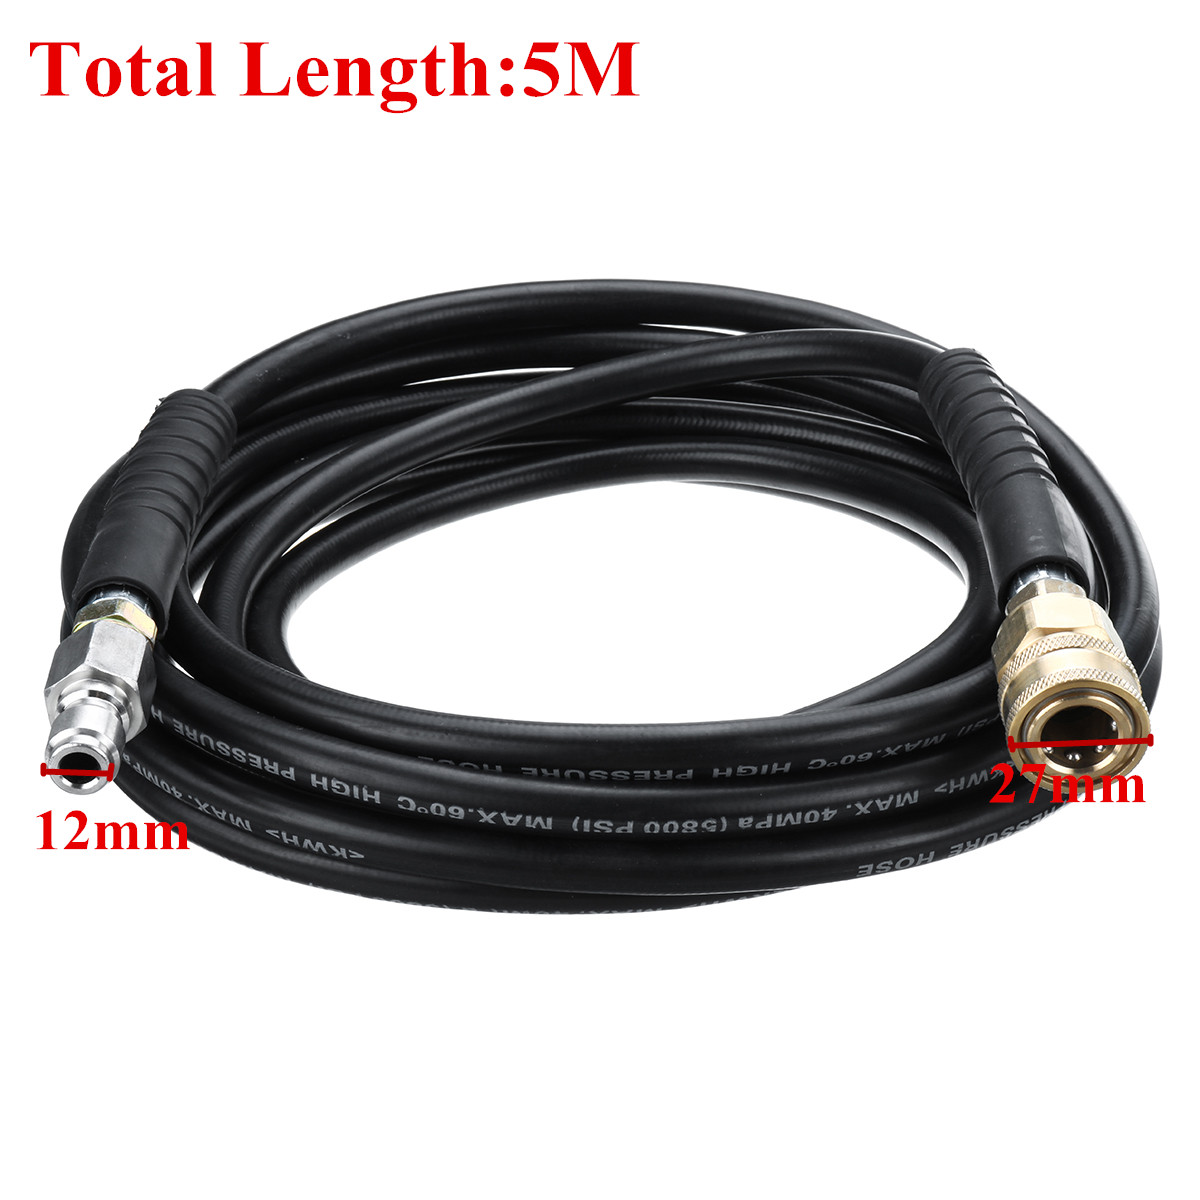 5M-5800PSI-High-Pressure-Washer-Hose-Pipe-Drain-Sewer-Cleaning-Hose-for-Car-Garden-Water-Washer-1558770-2